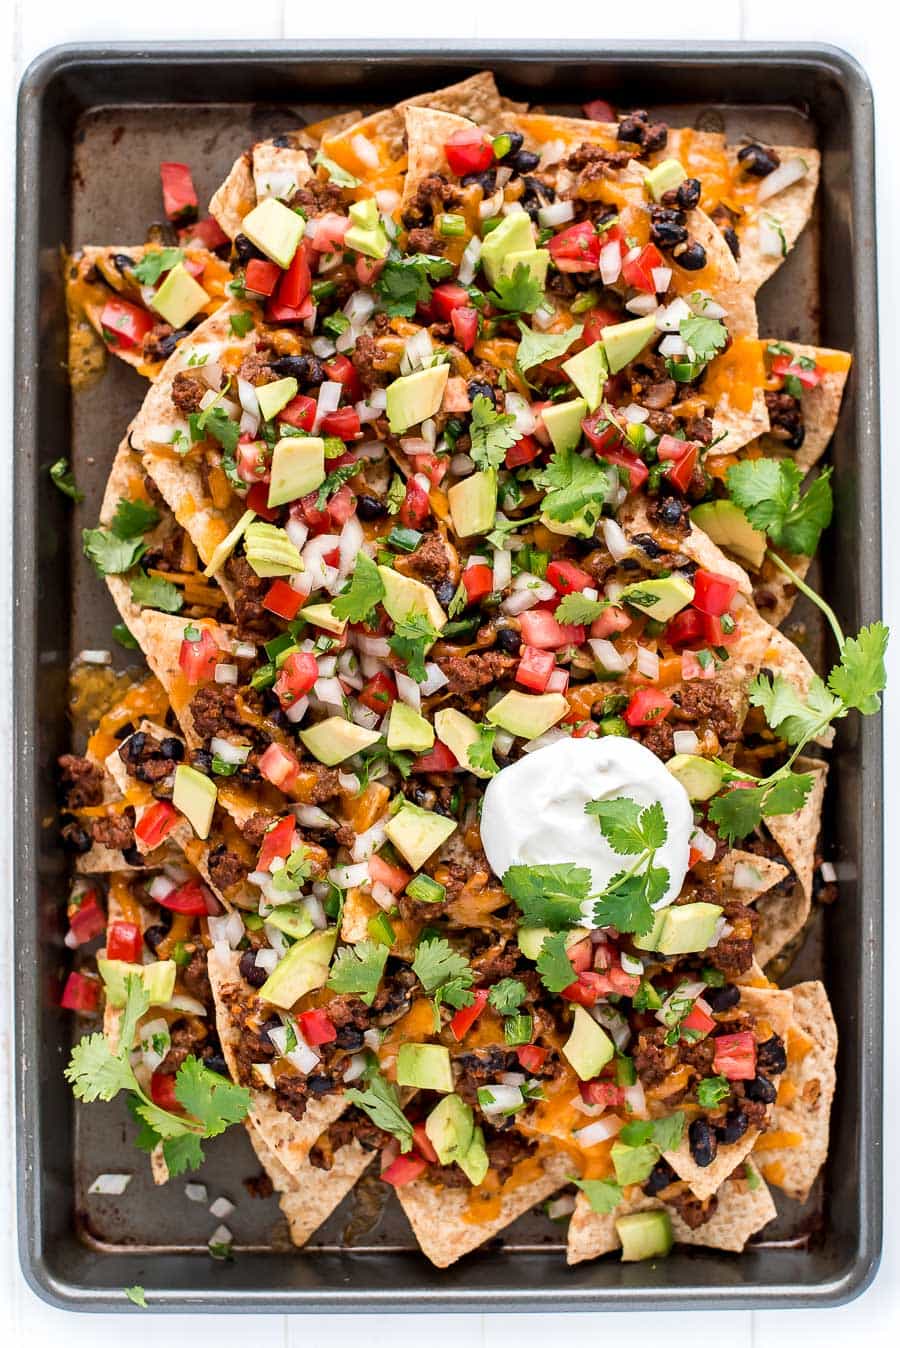 Loaded Nachos topped with sour cream and cilantro served on sheet pan.